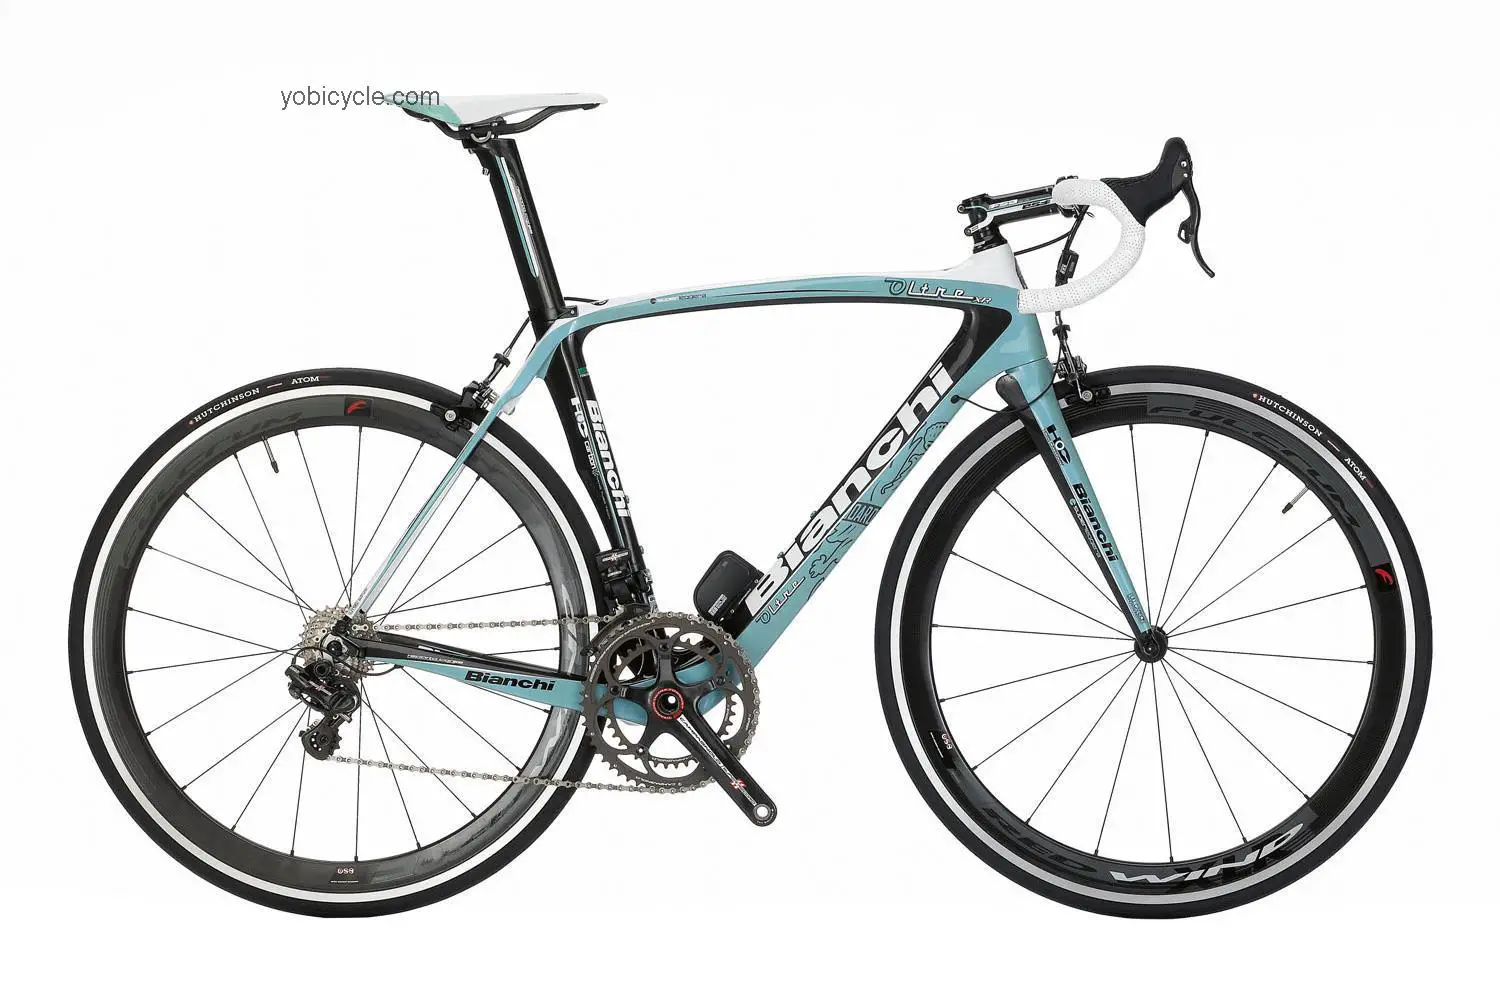 Bianchi  Oltre XR Super Record EPS Technical data and specifications